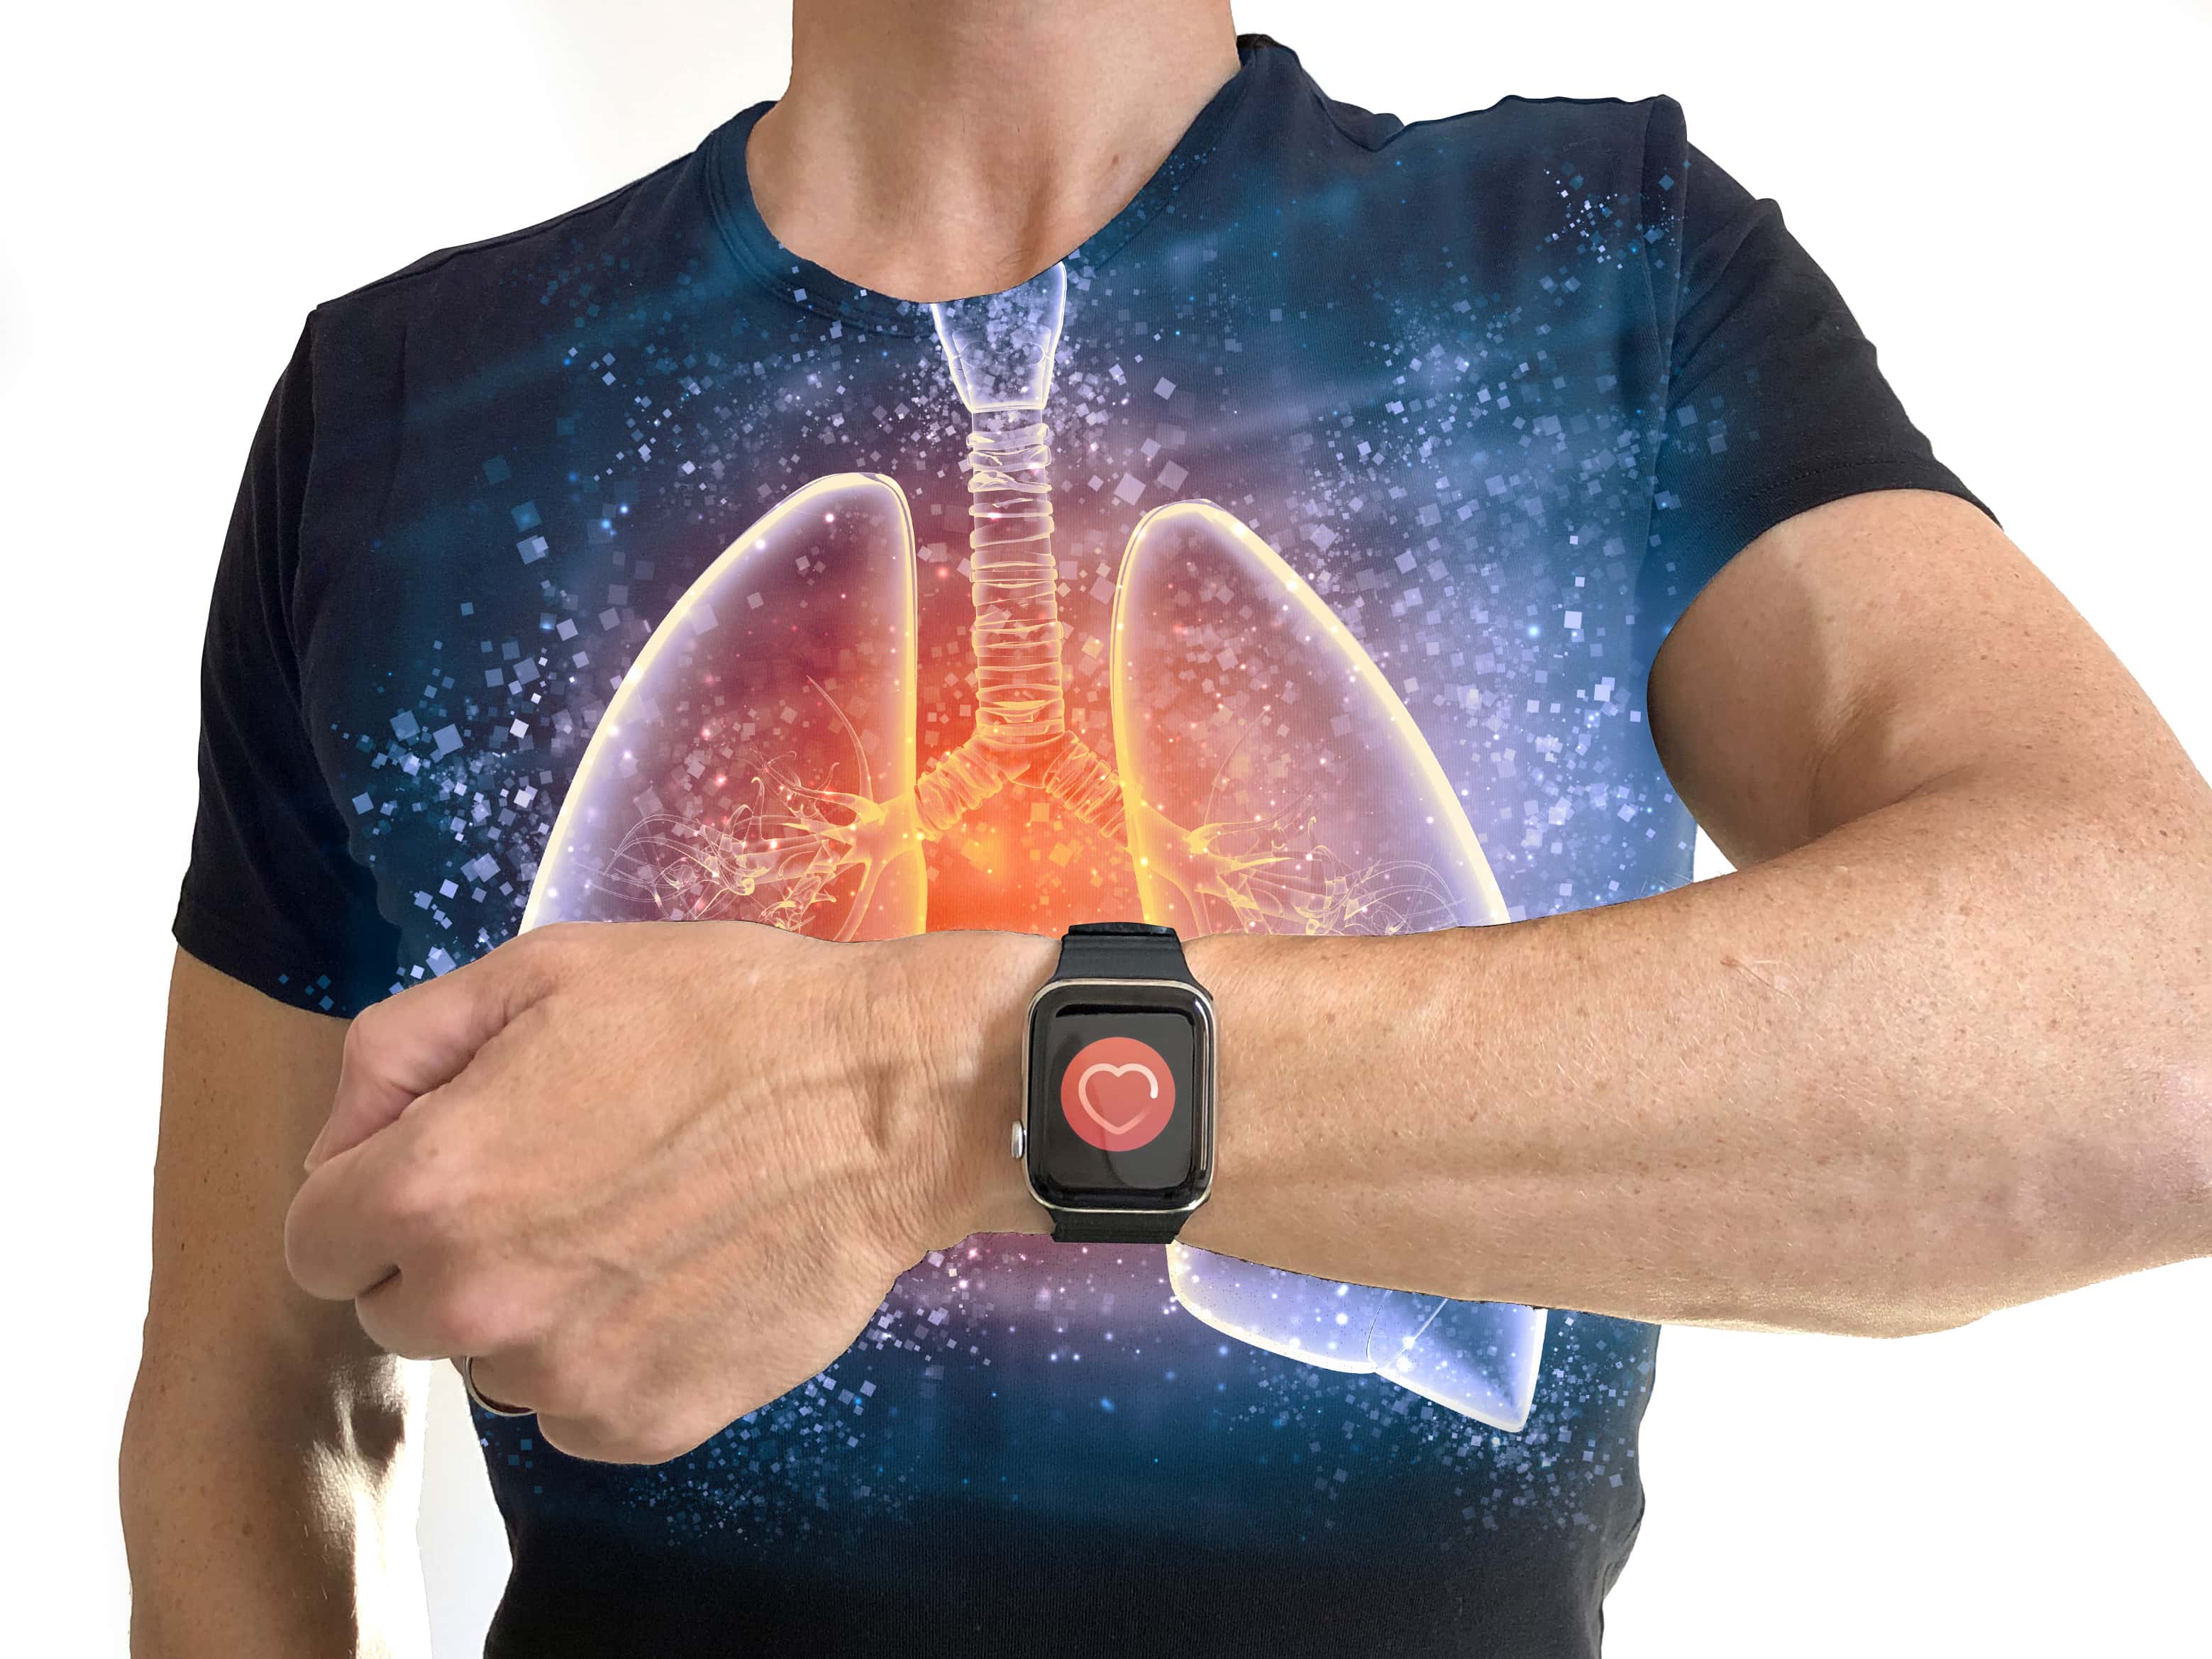 Most of the interesting stuff in your body happens in your core, not on your wrist.